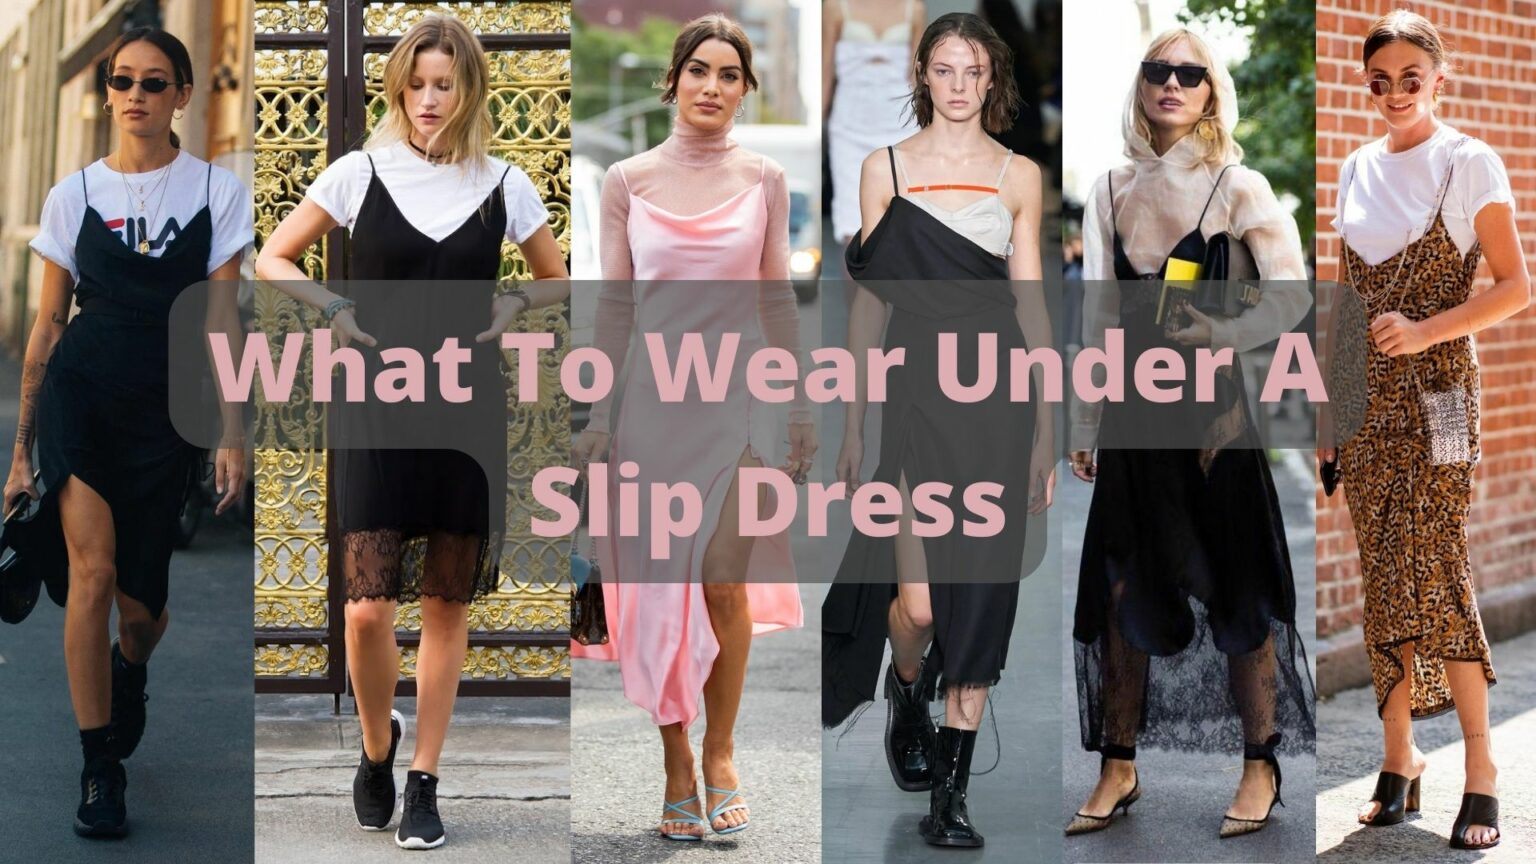 What To Wear Under A Slip Dress - Types of Undergarments Guide